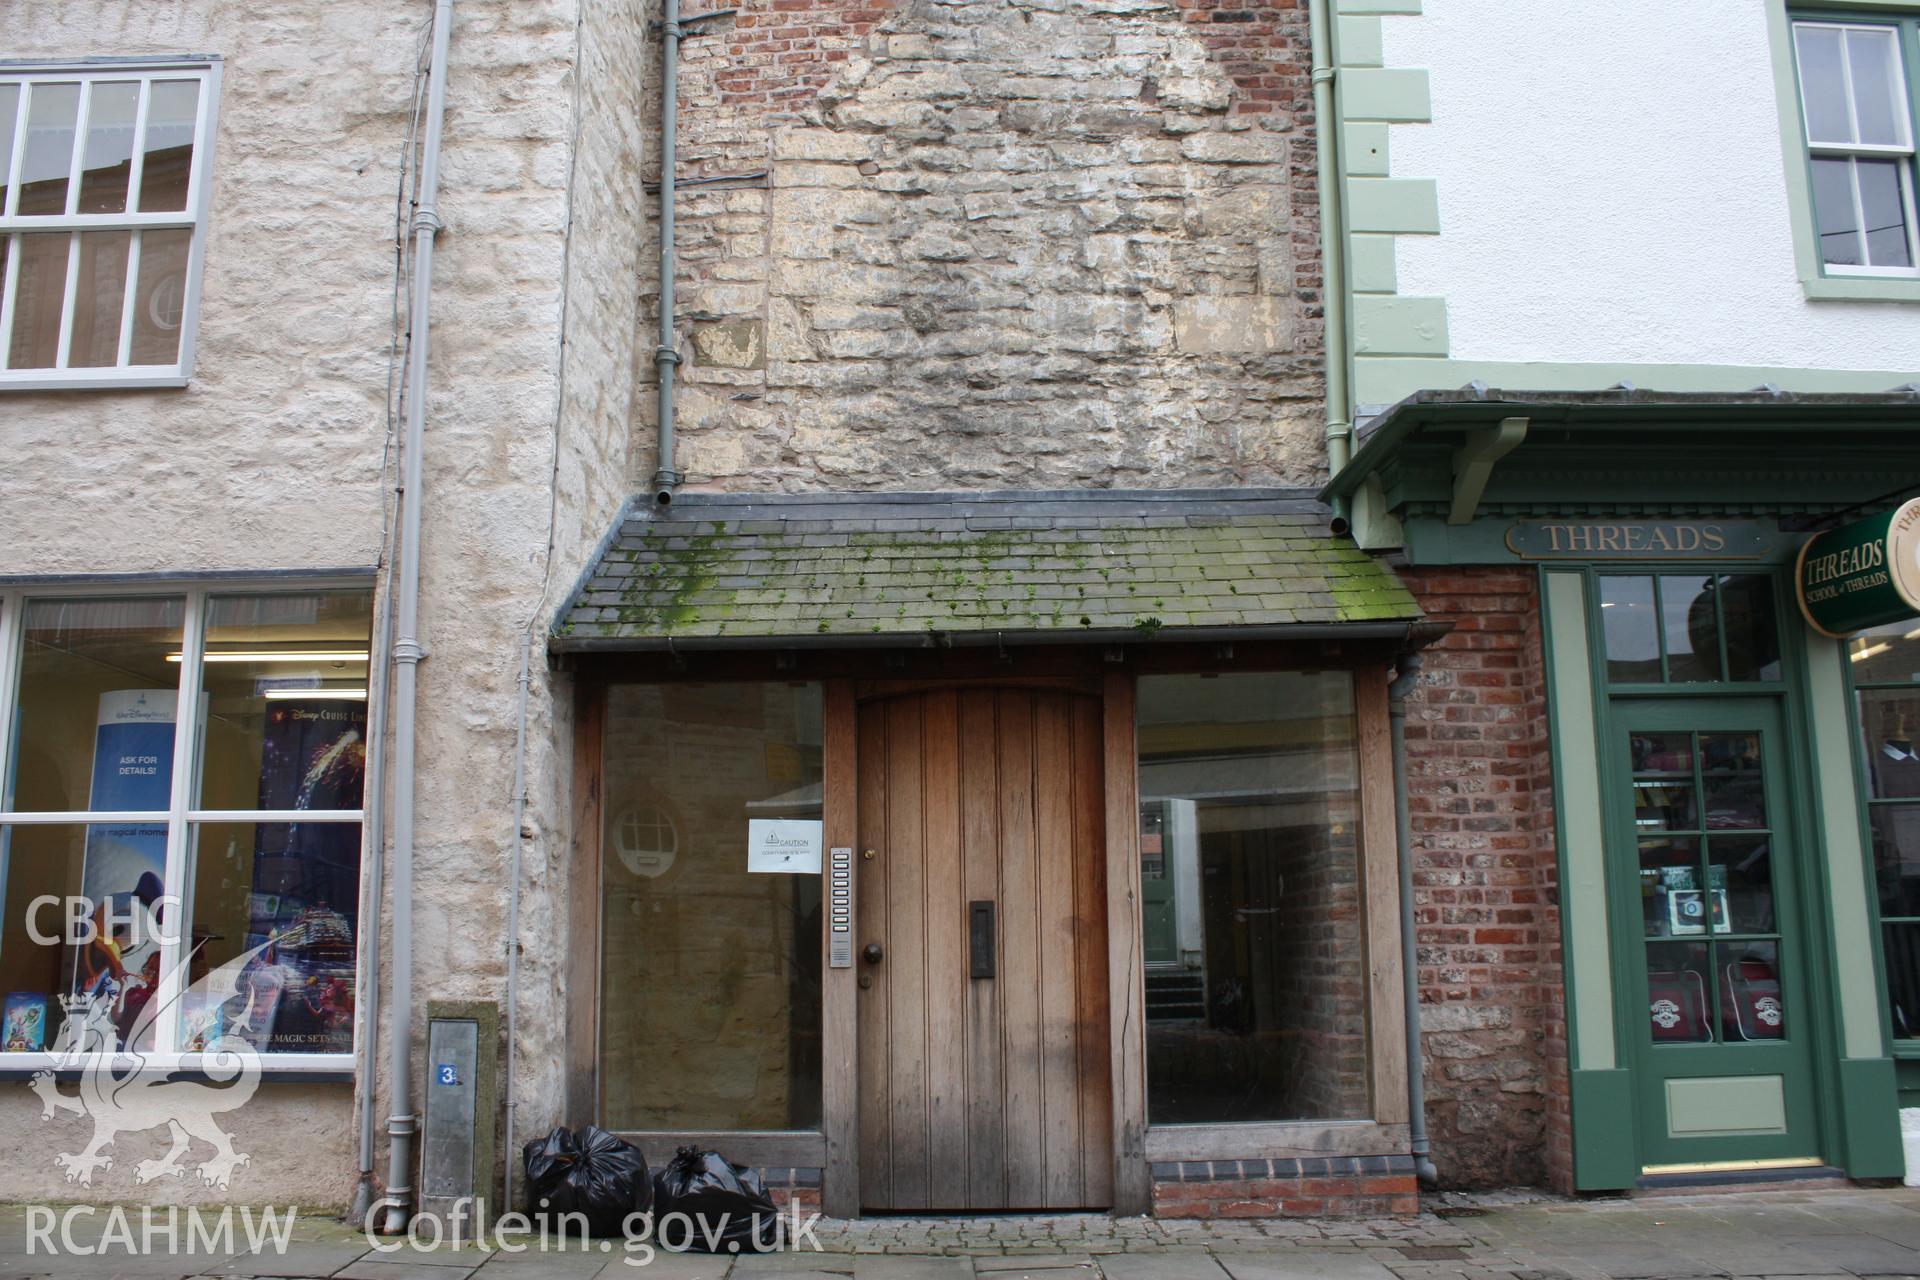 Colour photograph showing exterior of the Bake-house, Back row, Denbigh, Photographed during survey conducted by Geoff Ward on 17th May 2011.